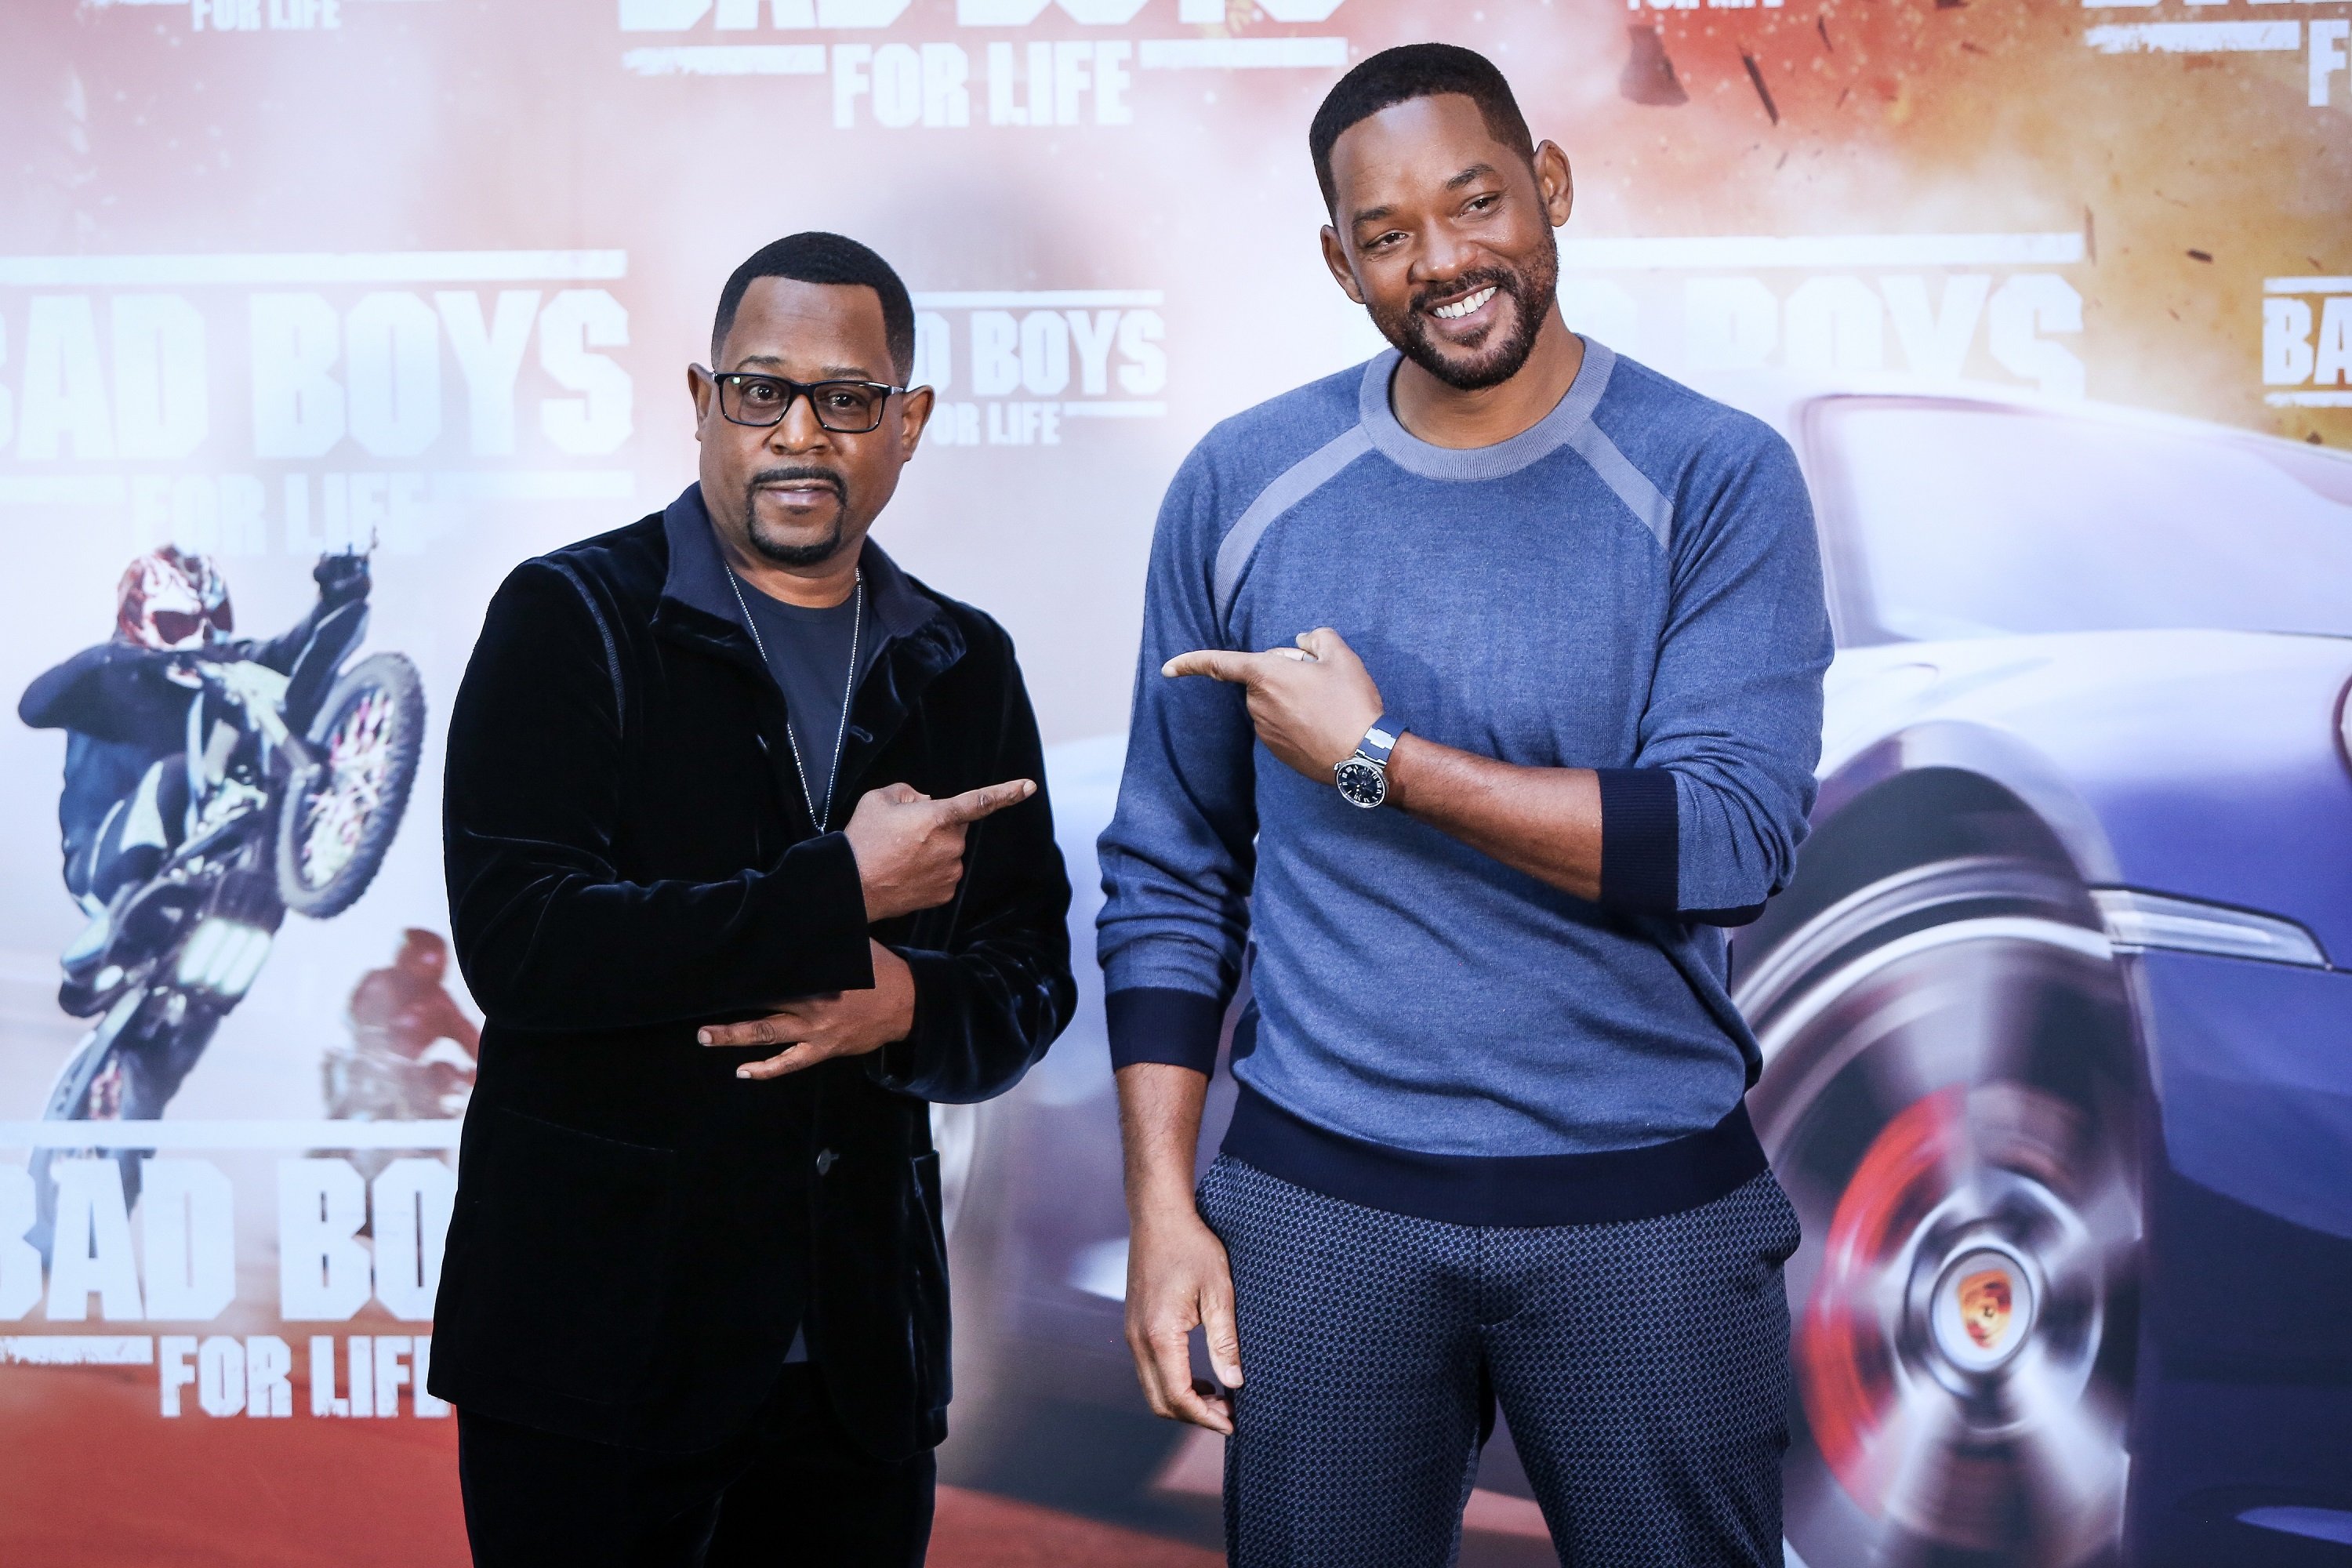 'Bad Boys for Life' stars Martin Lawrence and Will Smith